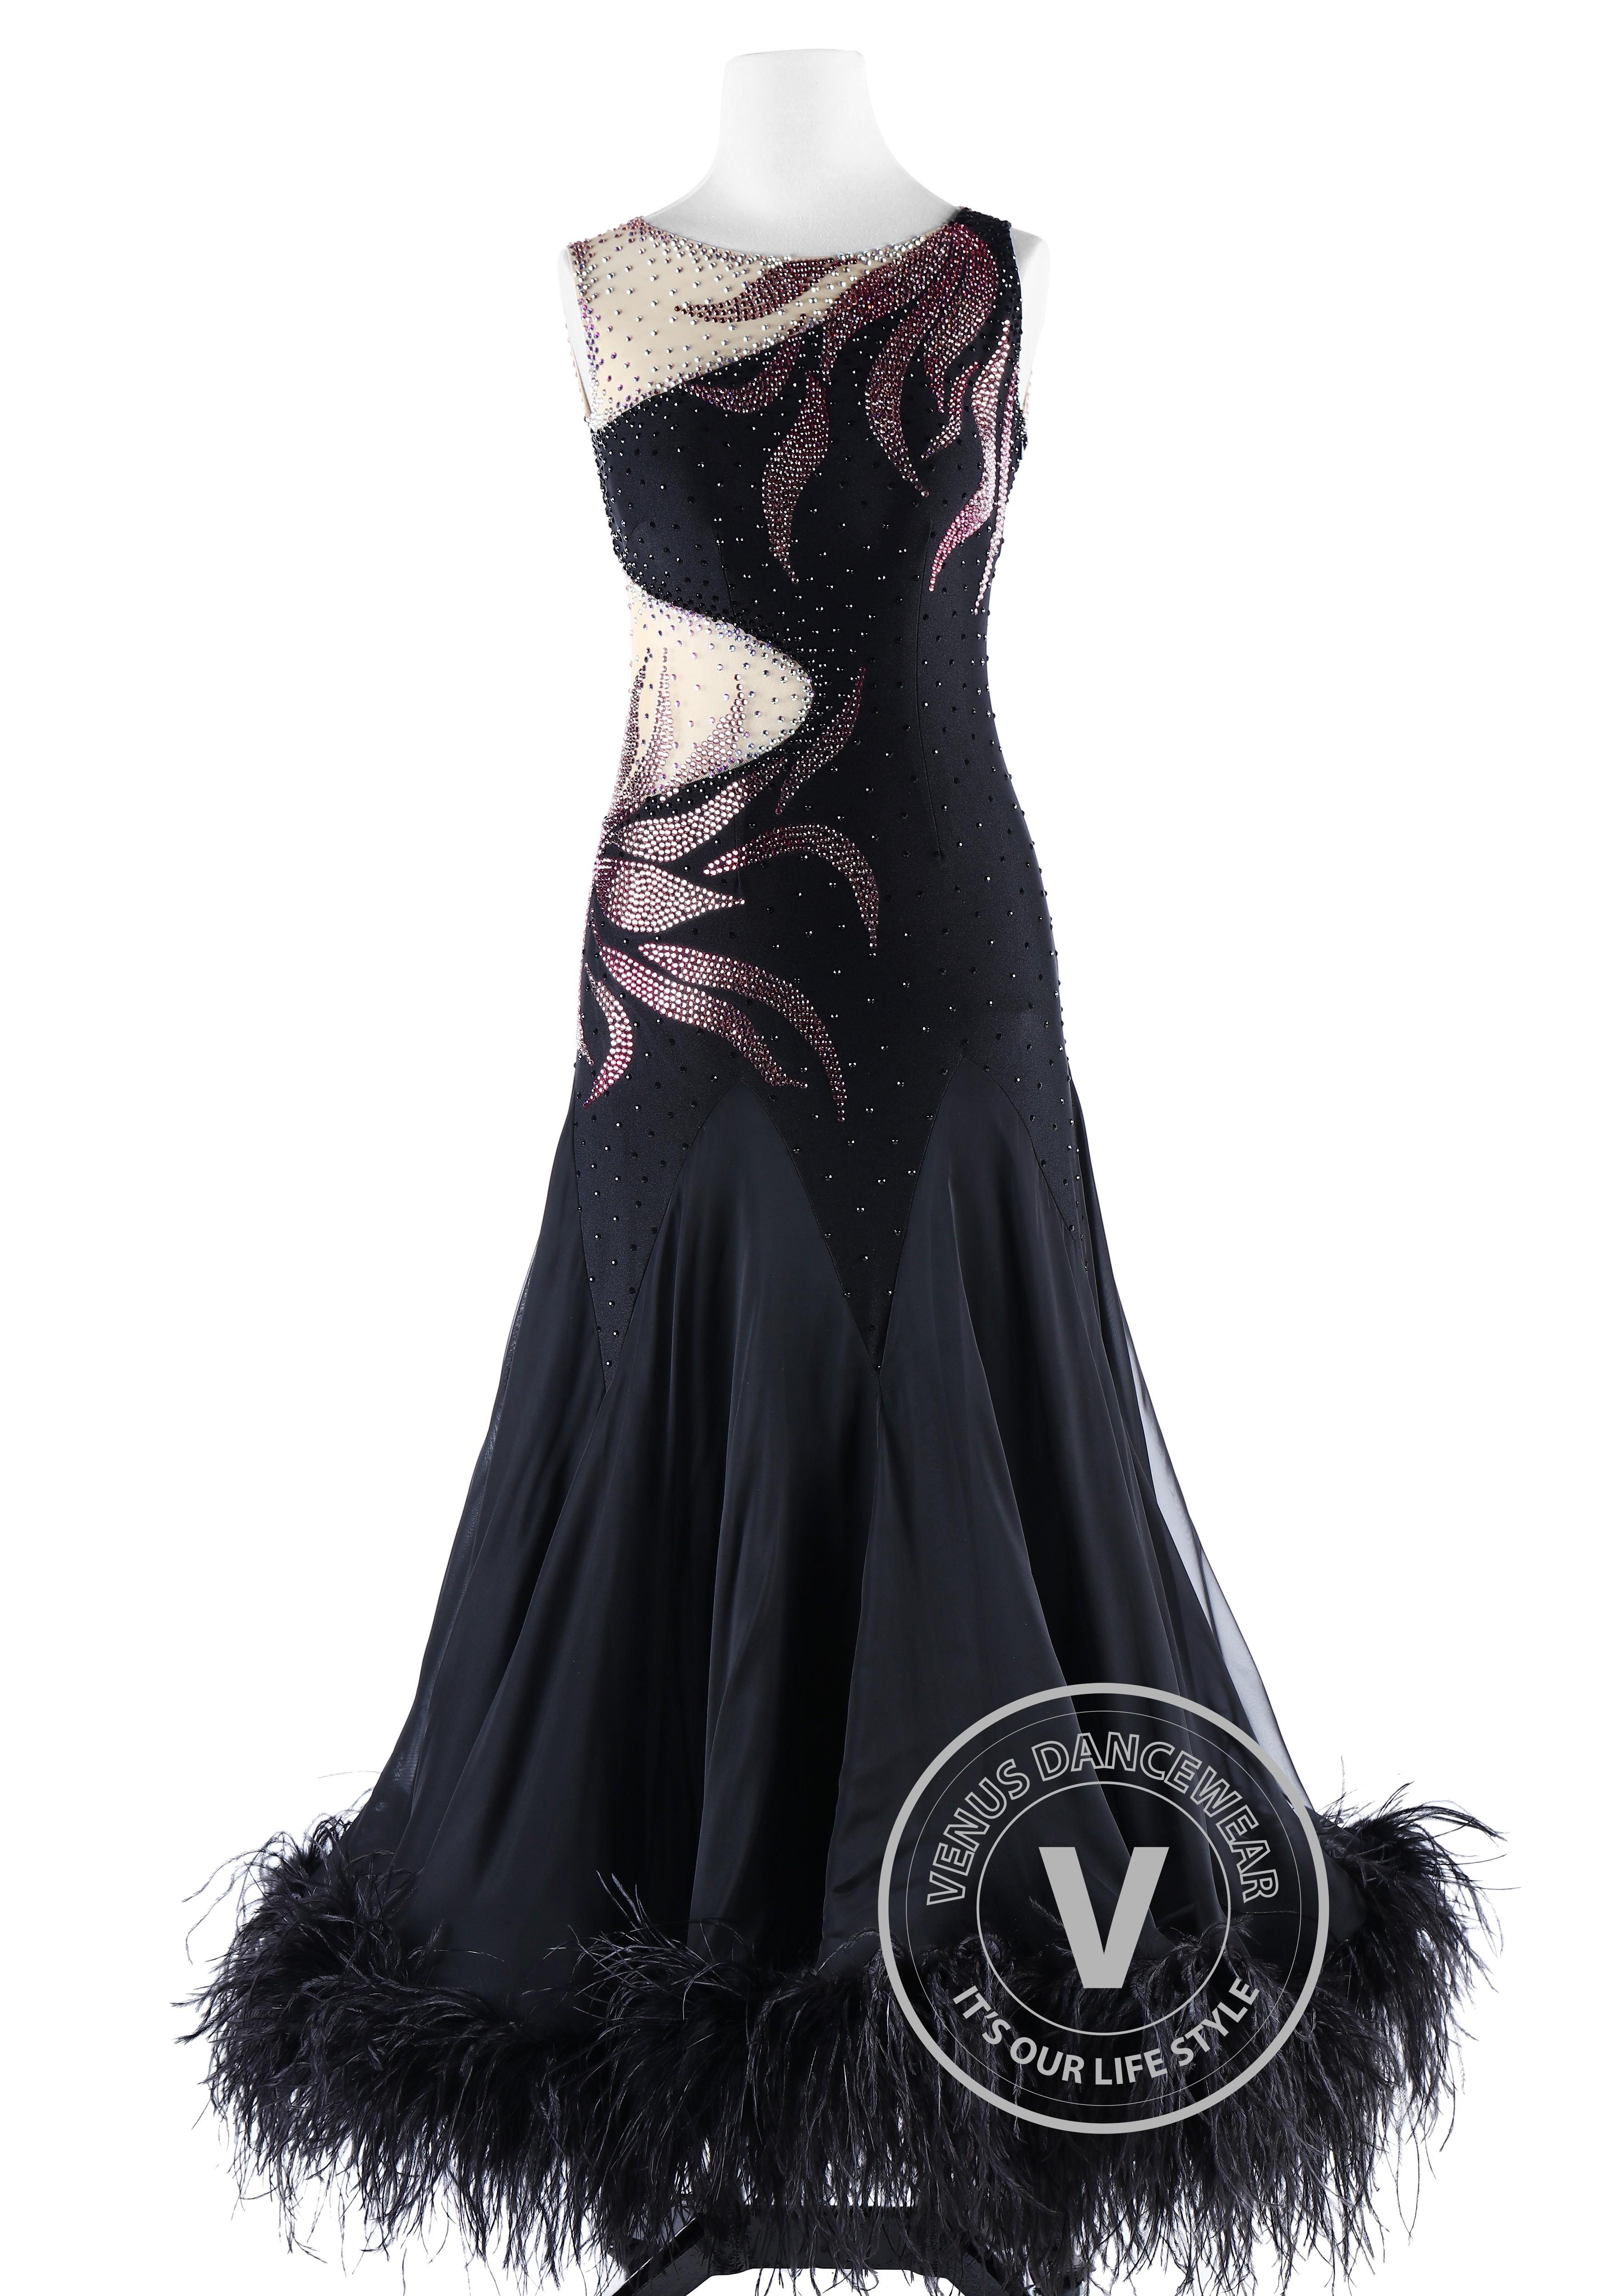 Black Gold Shading Silk with Ostrich Feather Ballroom Smooth Competition  Dance Dress